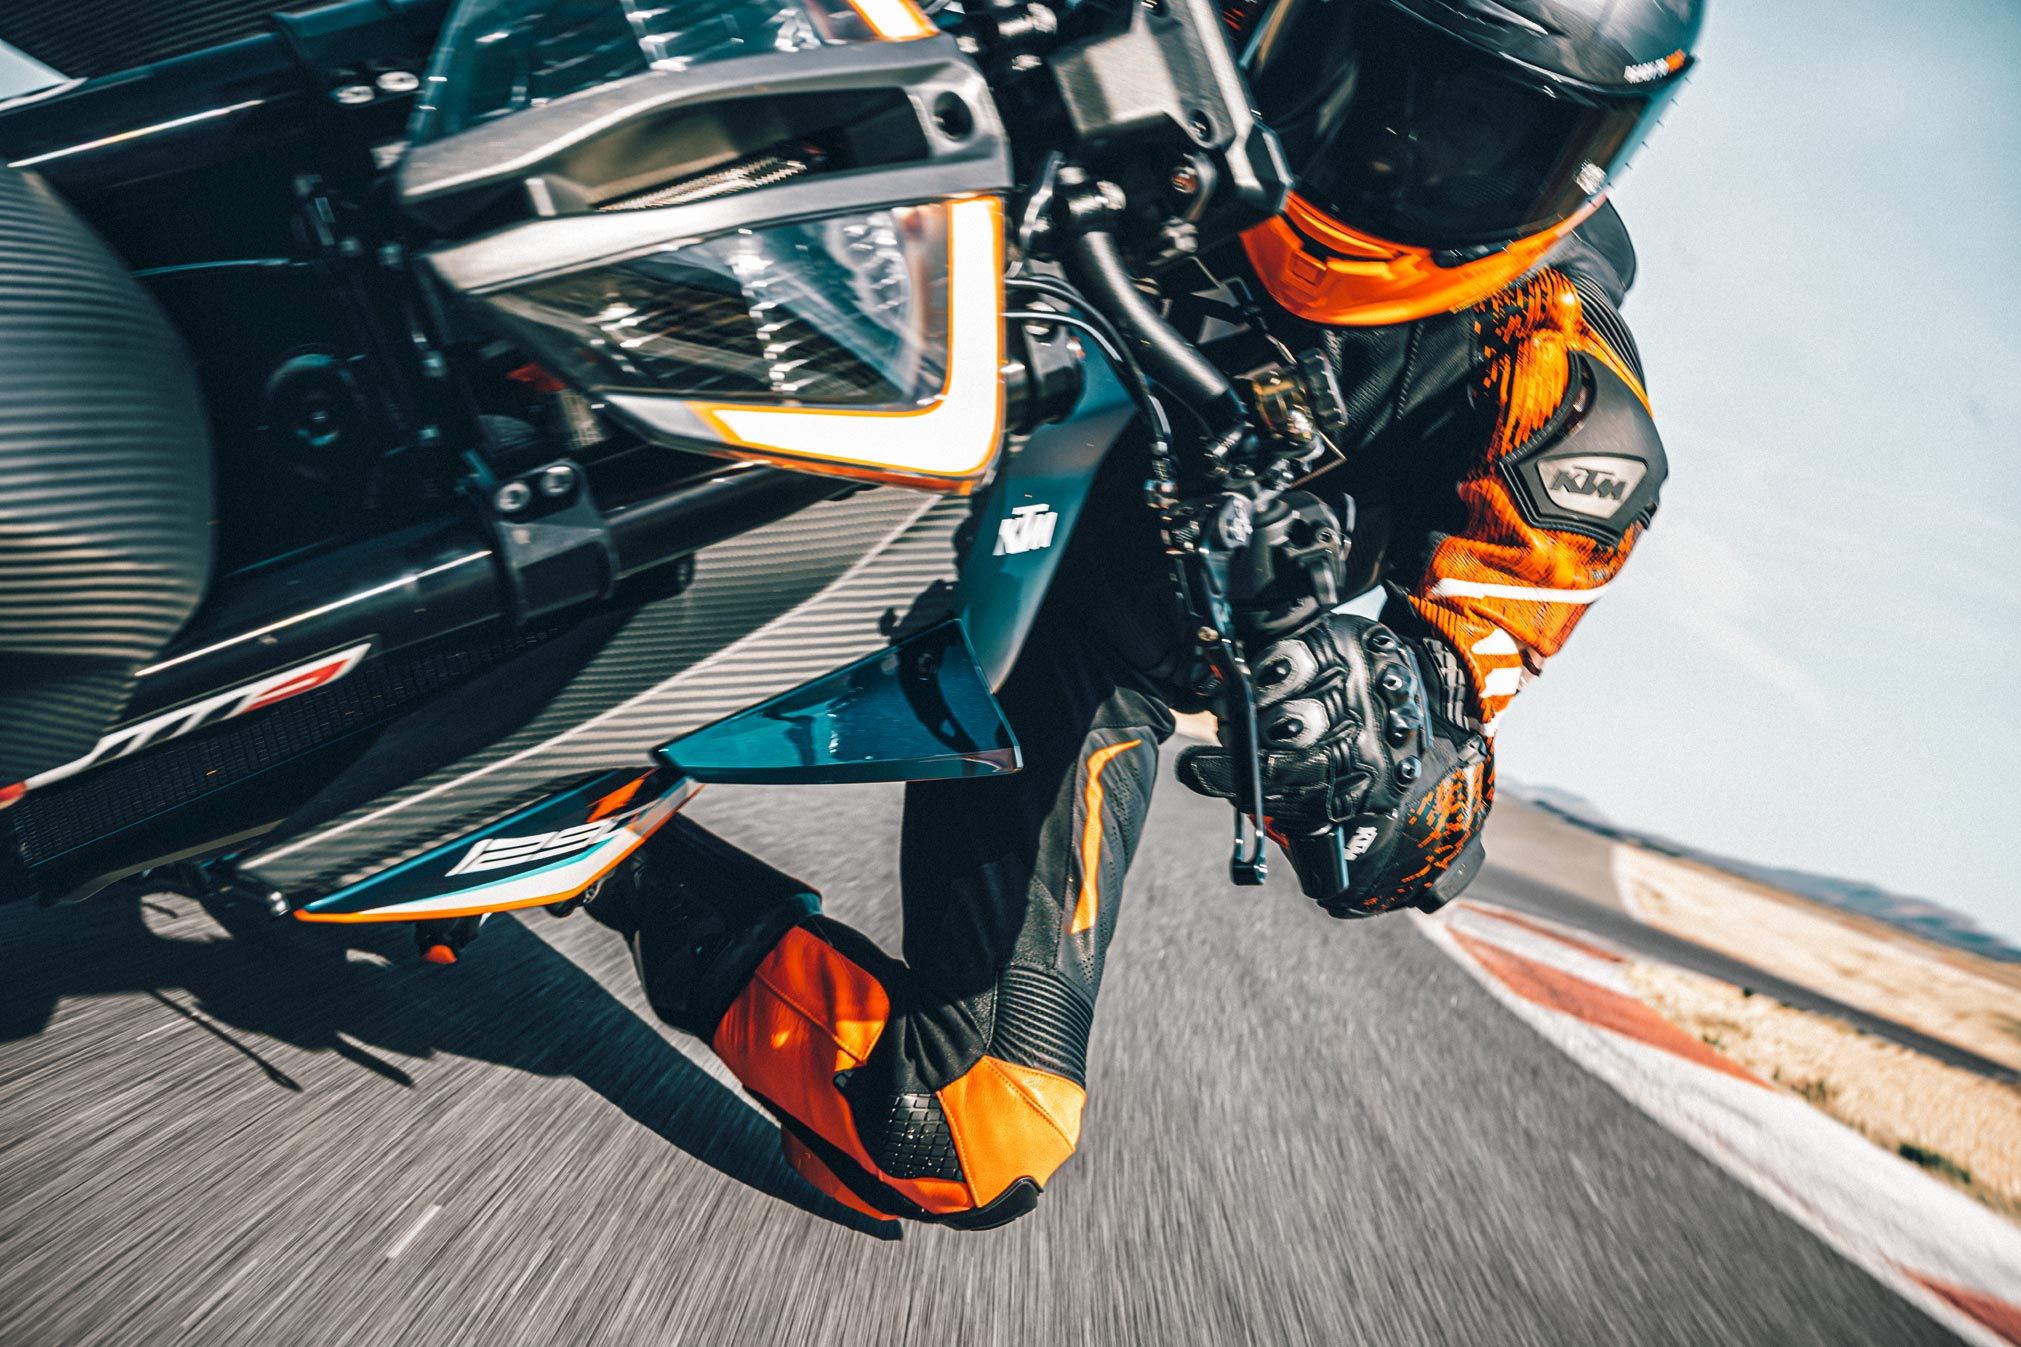 New 21 Ktm Motorcycle Sells Out In Minutes Total Motorcycle